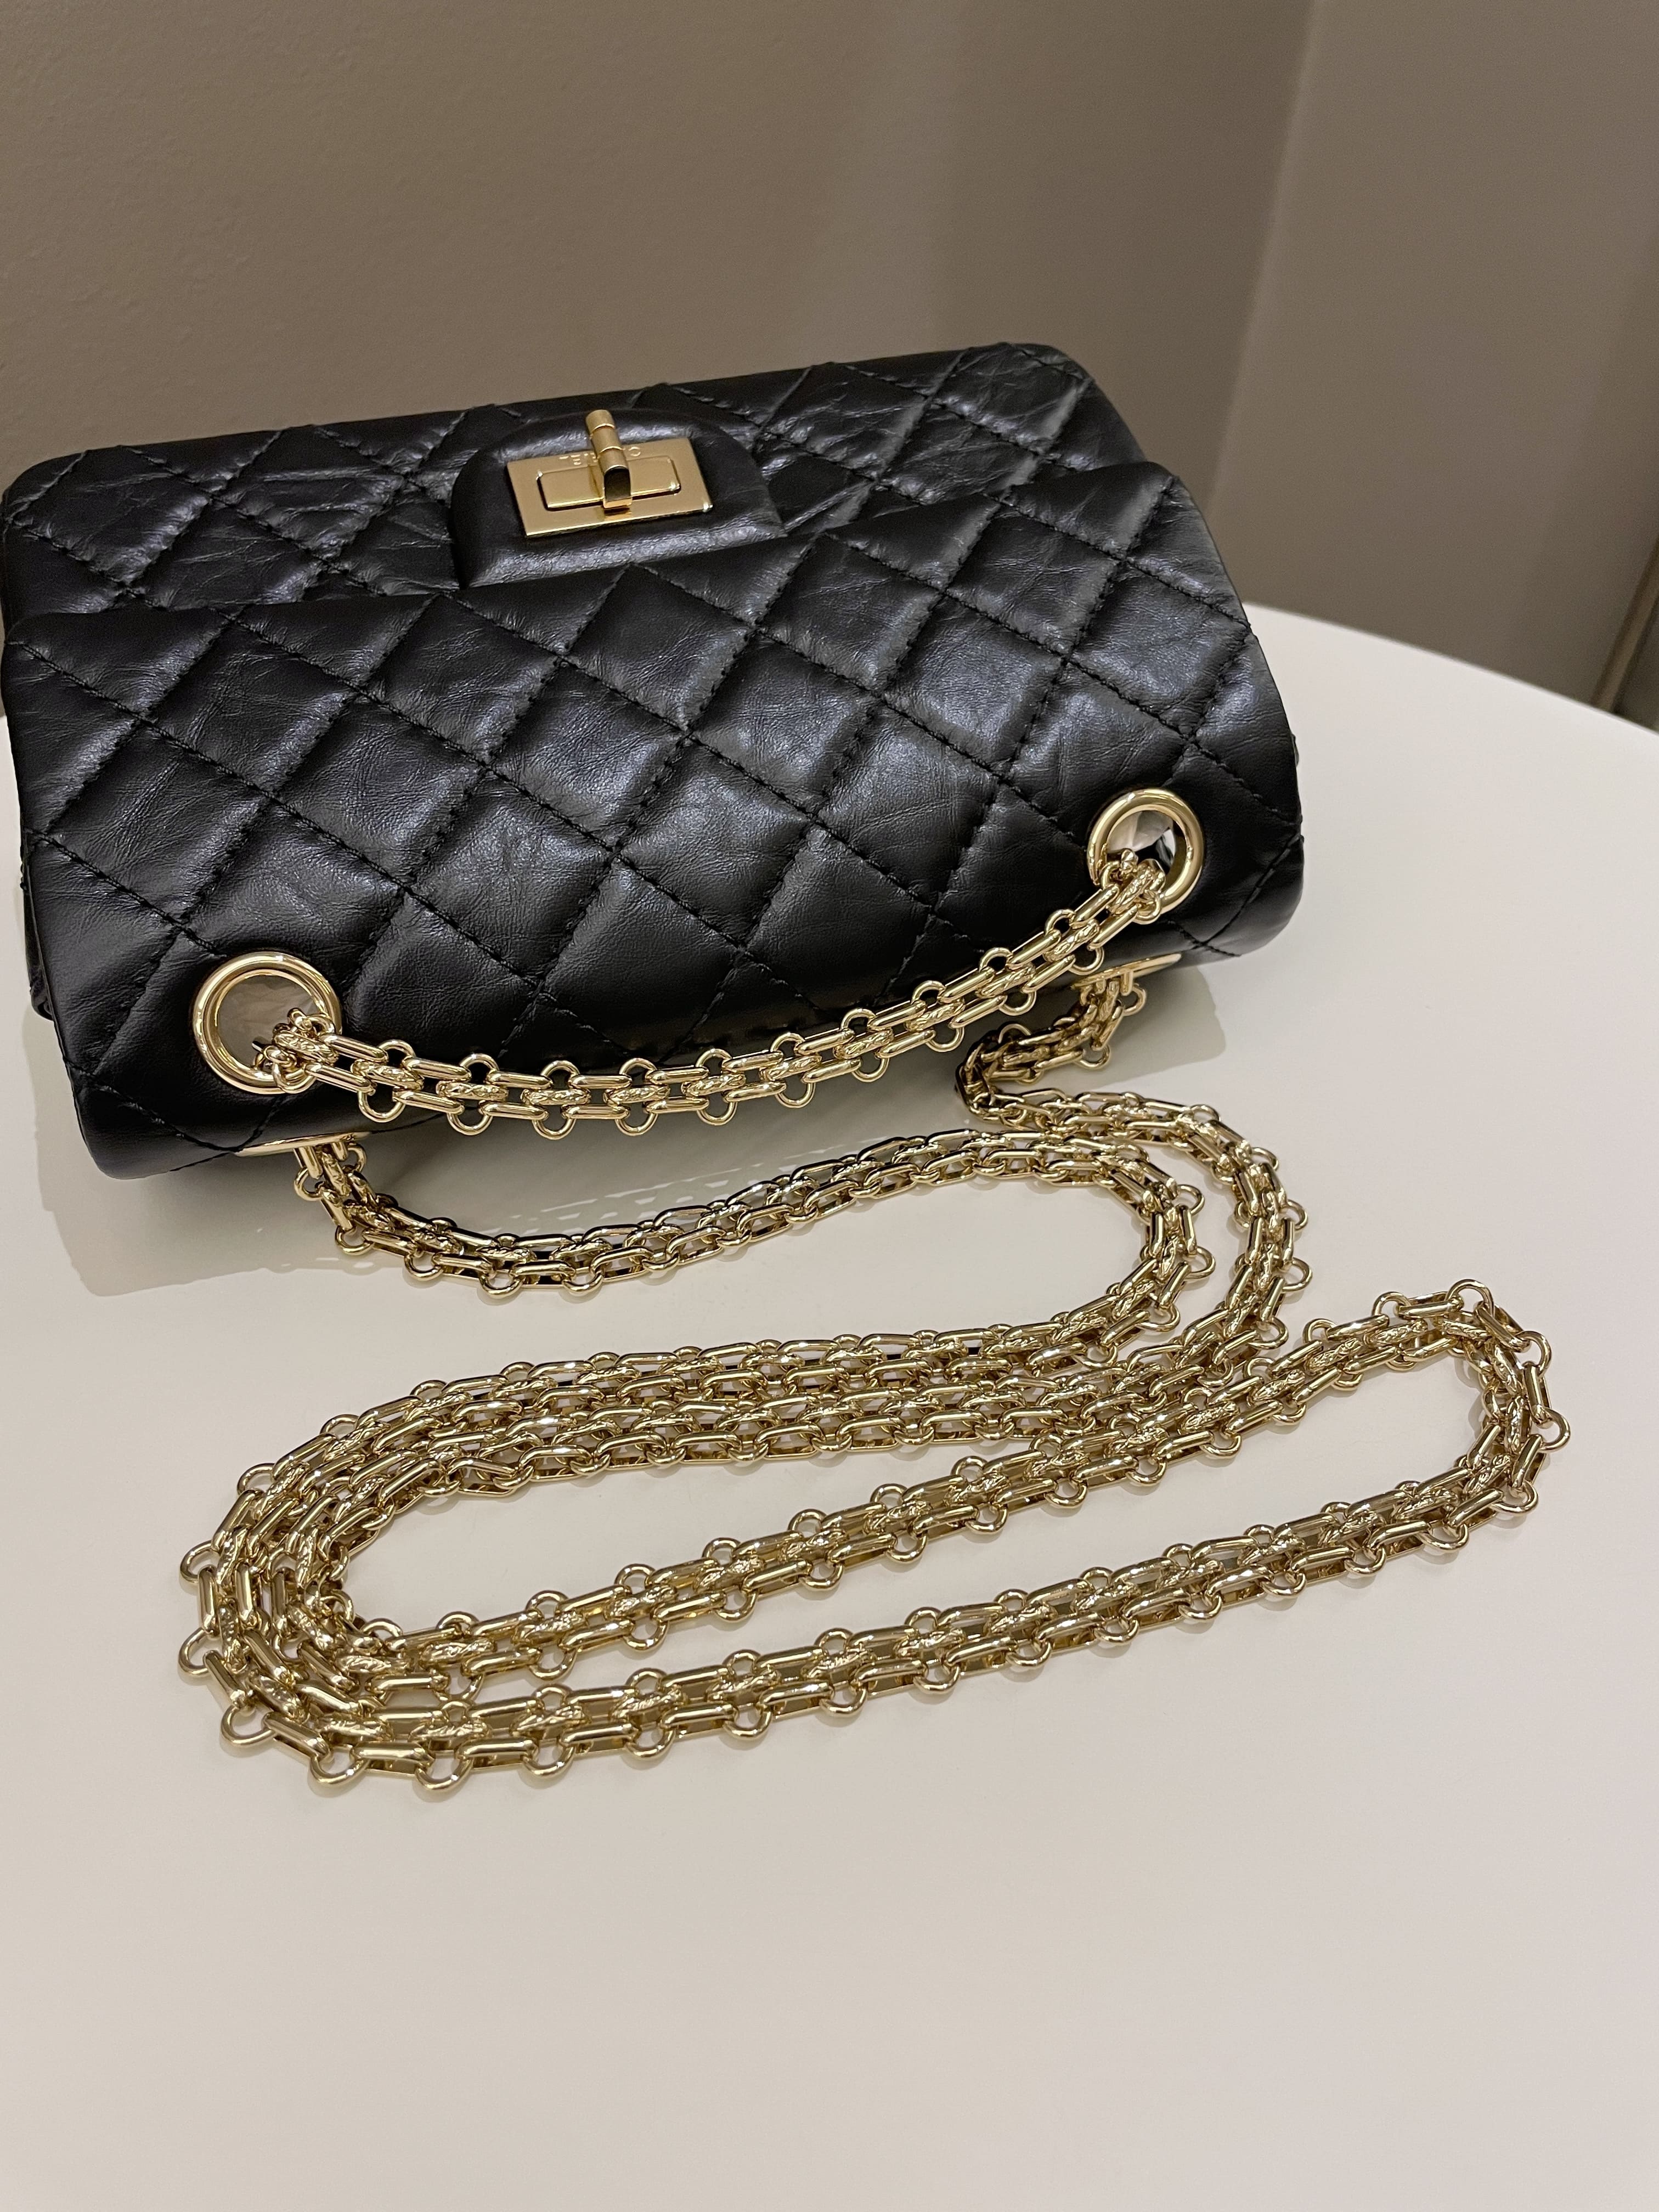 Chanel 2.55 Quilted Mini Reissue Black Aged Calfskin